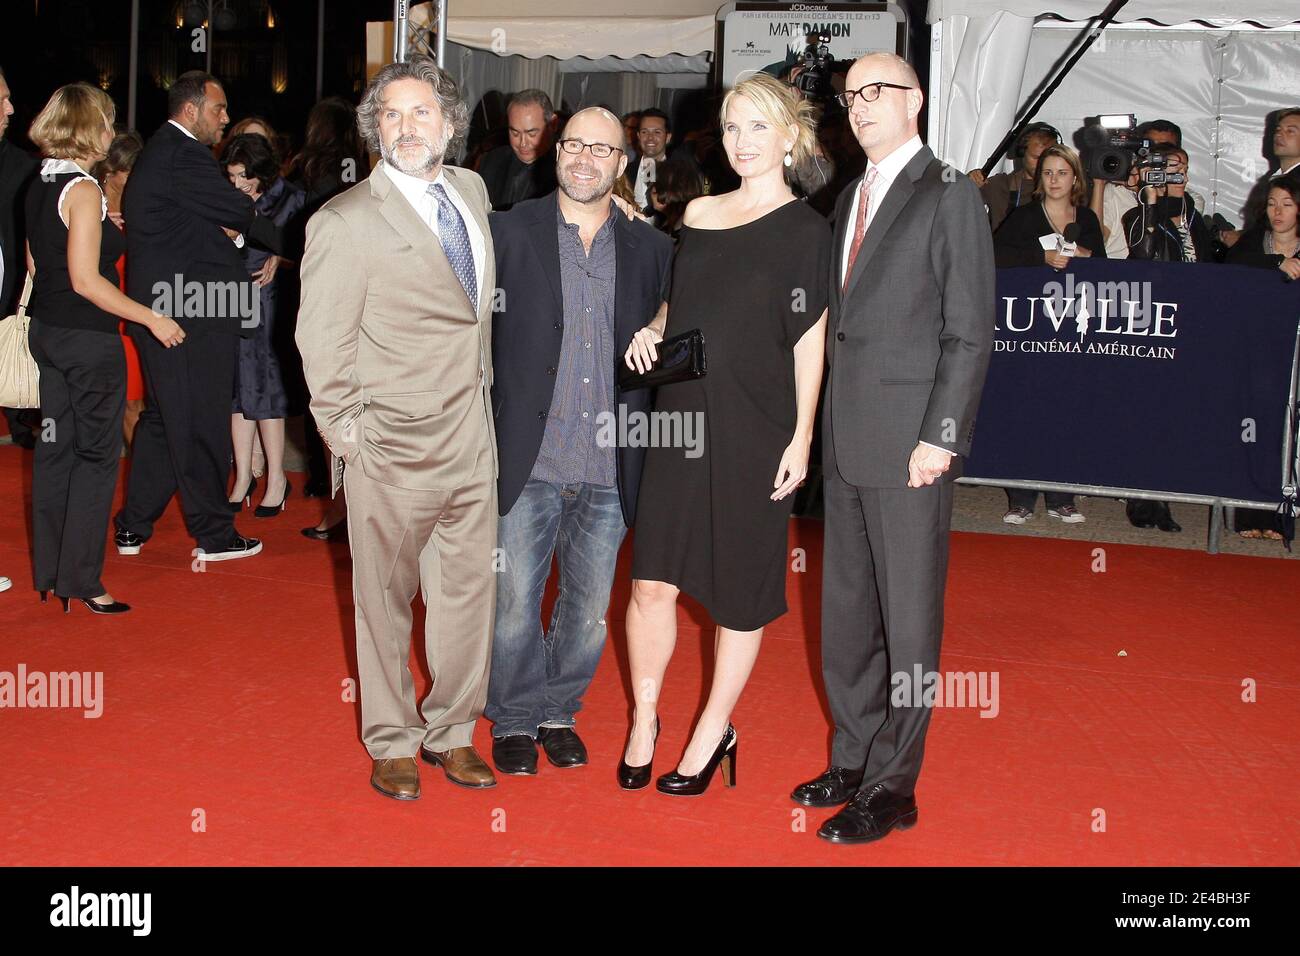 Director Steven Soderbergh, Scott Z Burns, Jennifer Fox and Gregory Jacobs arriving to the screening of 'The Informant' during the 35th American Film Festival in Deauville, Normandy, France, on September 9, 2009. Photo by Denis Guignebourg/ABACAPRESS.COM Stock Photo